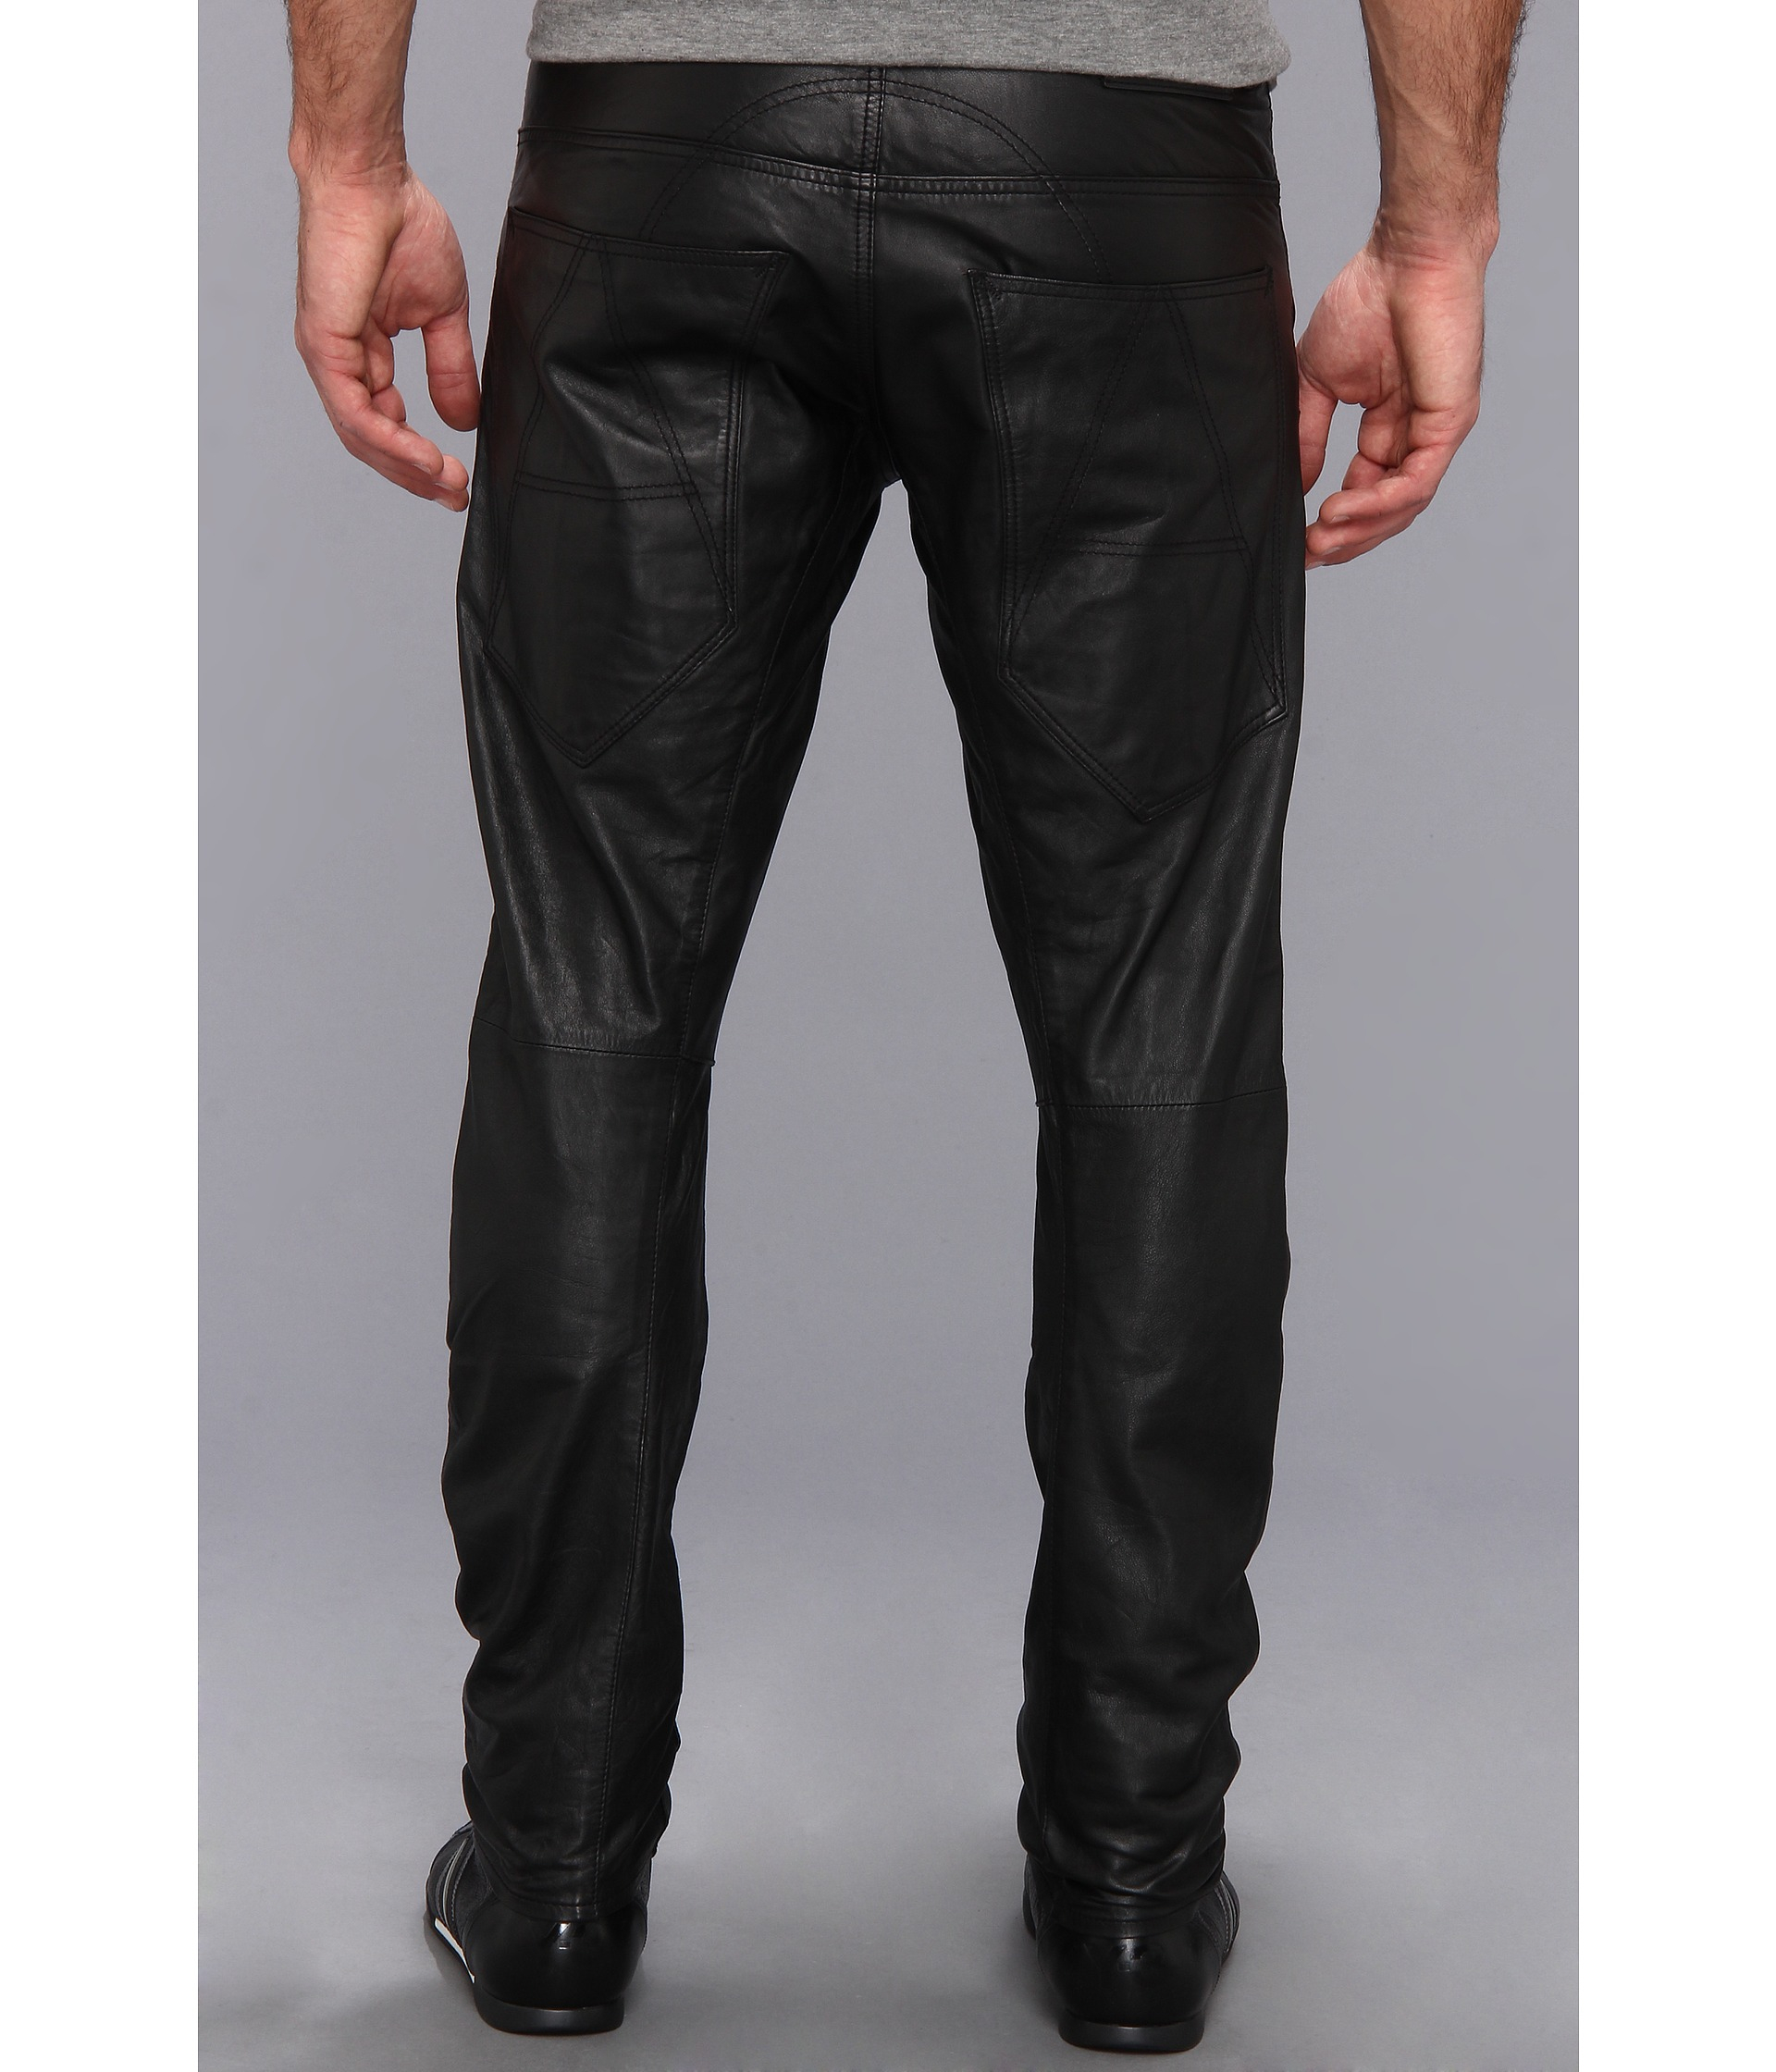 G-Star RAW Afrojack Acrotch Tapered Leather Pant in Black for Men - Lyst